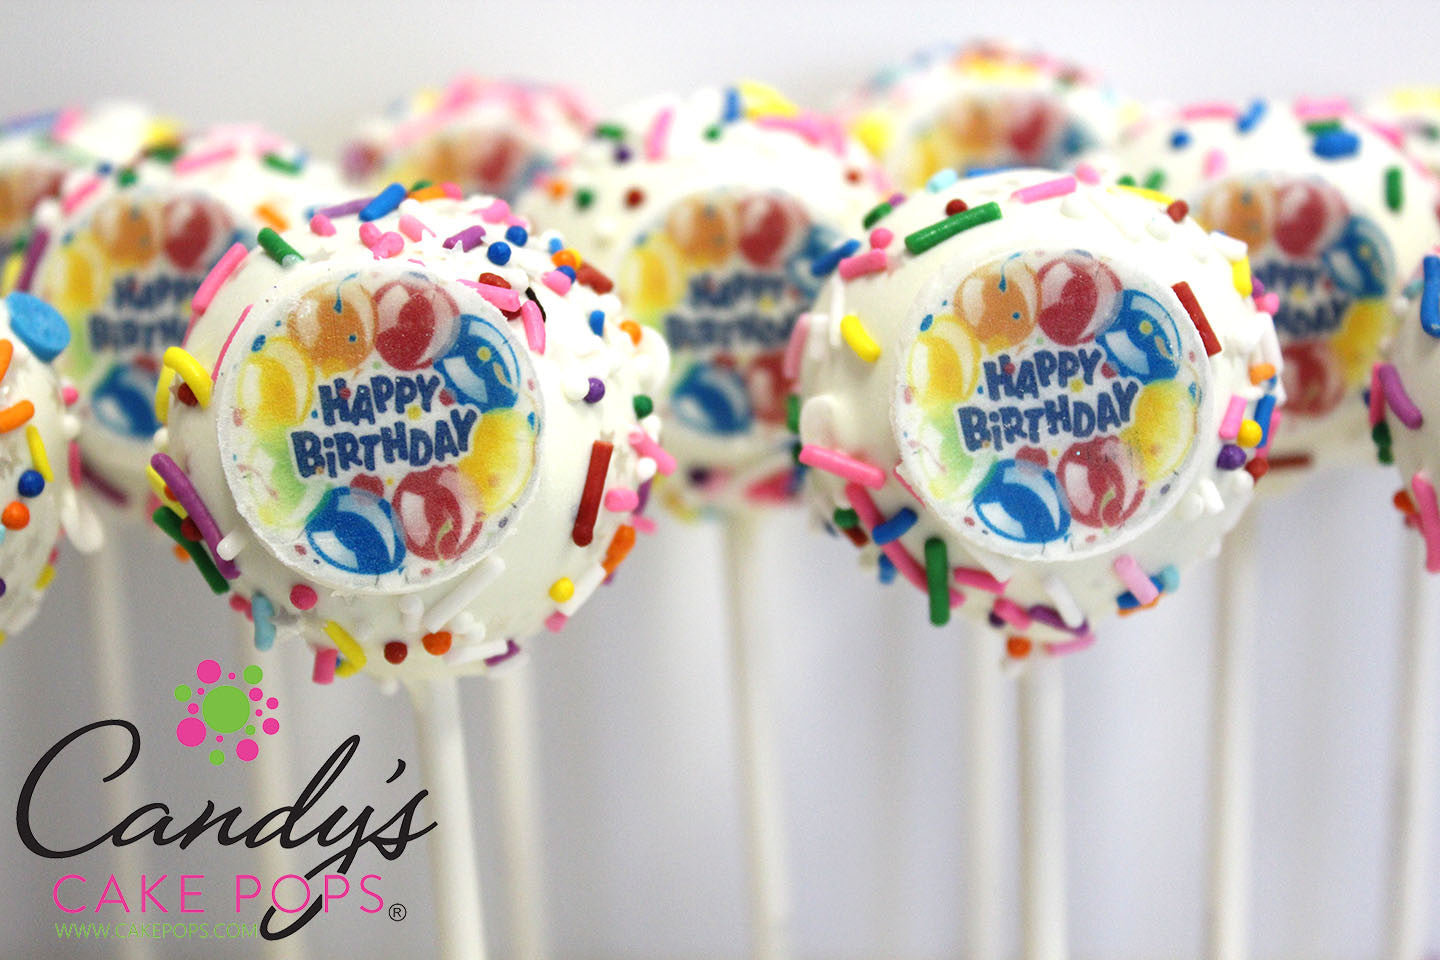 Happy Birthday Edible Decal Cake Pops - Candy's Cake Pops